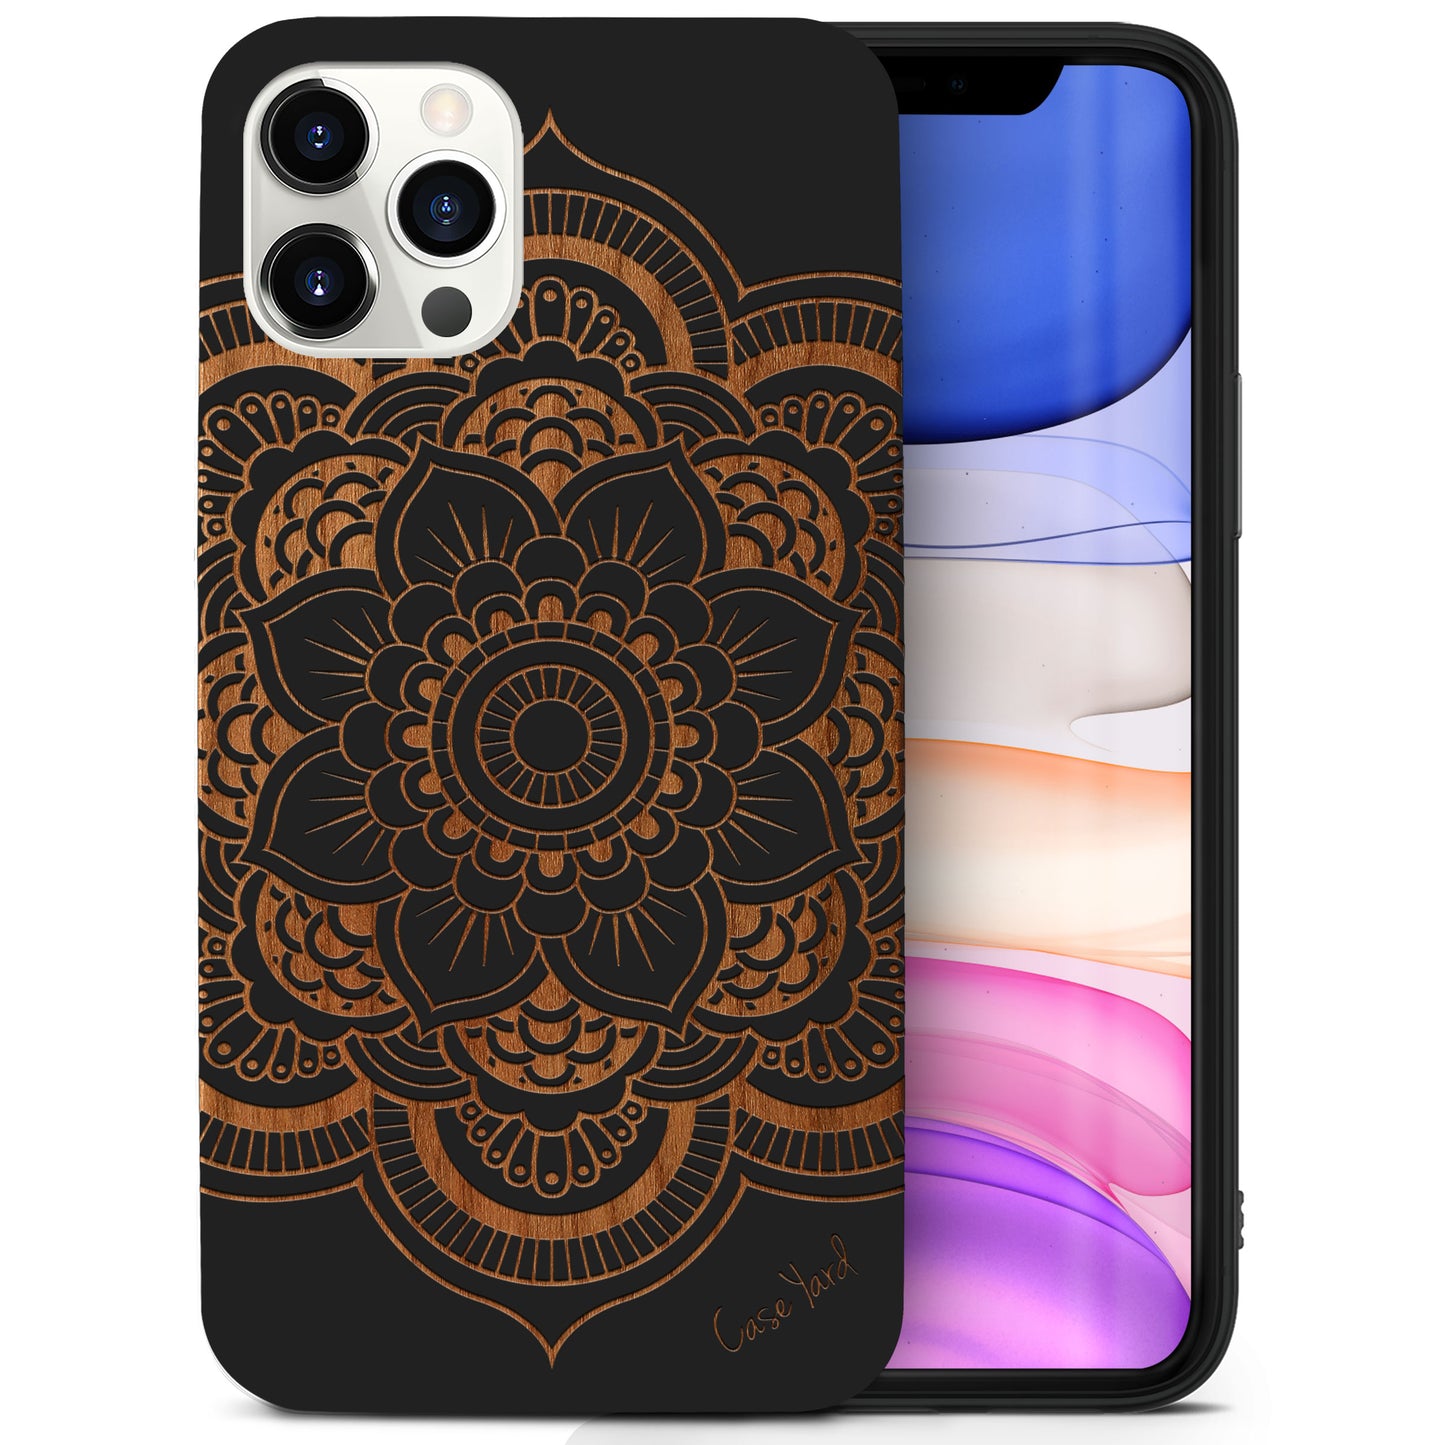 Wooden Cell Phone Case Cover, Laser Engraved case for iPhone & Samsung phone Flower Mandala Wood Design